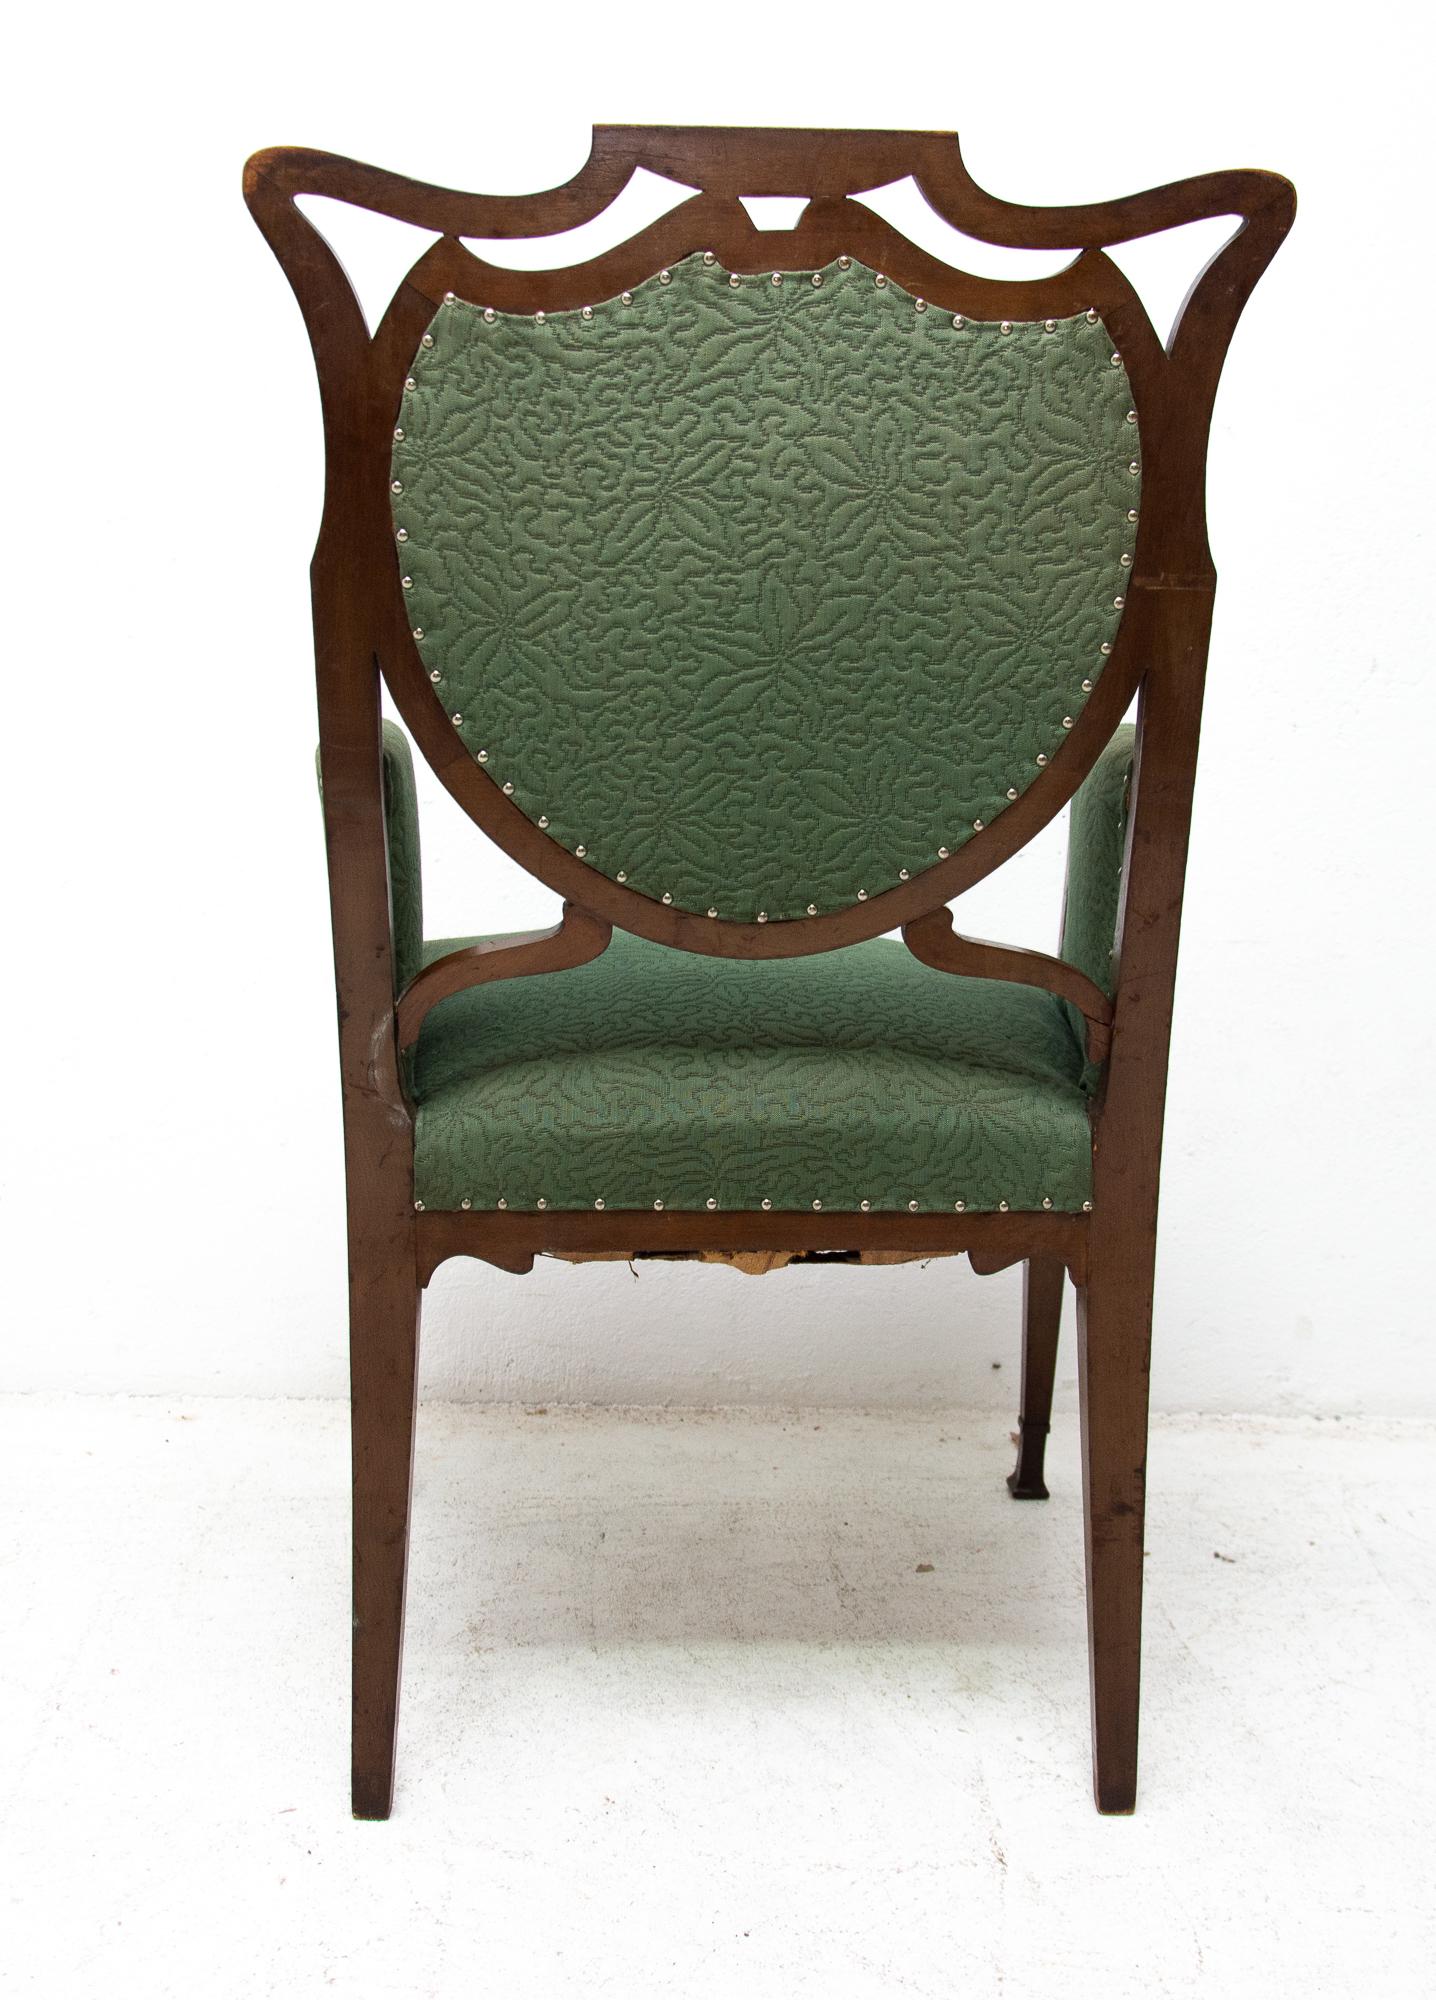 These beautiful Art Nouveau armchairs were made in Austria-Hungary, circa 1910. They are made of dark stained oakwood. They have an original upholstery. The chairs are structurally in good vintage condition. They have damaged upholstery at the